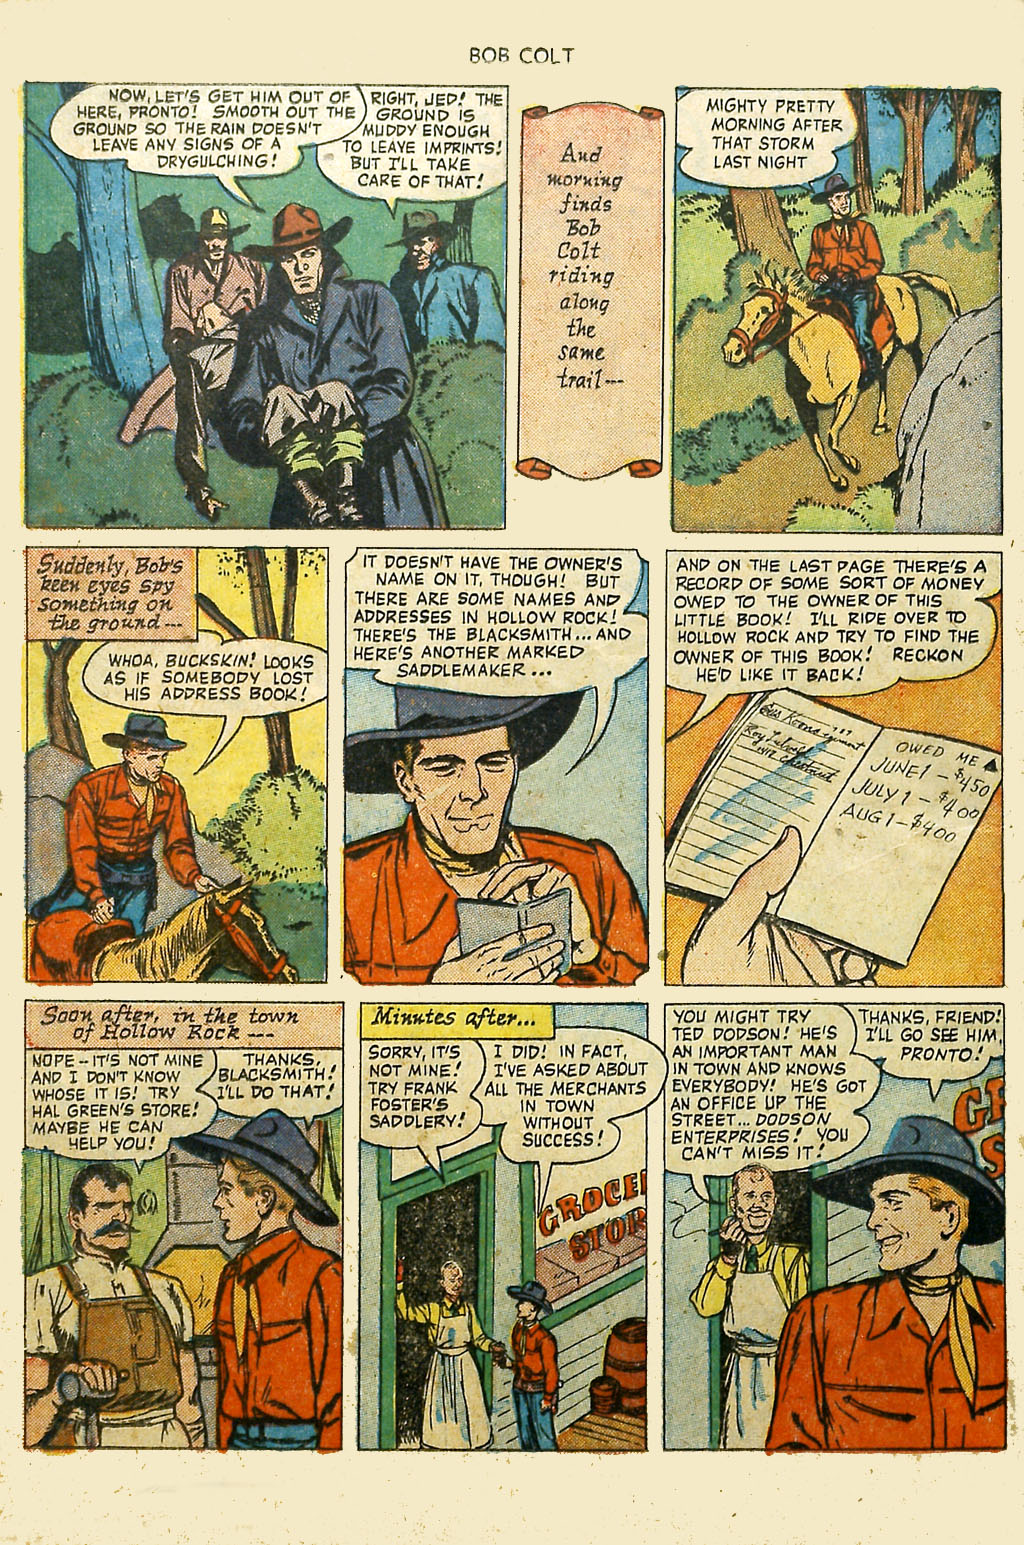 Read online Bob Colt Western comic -  Issue #2 - 16